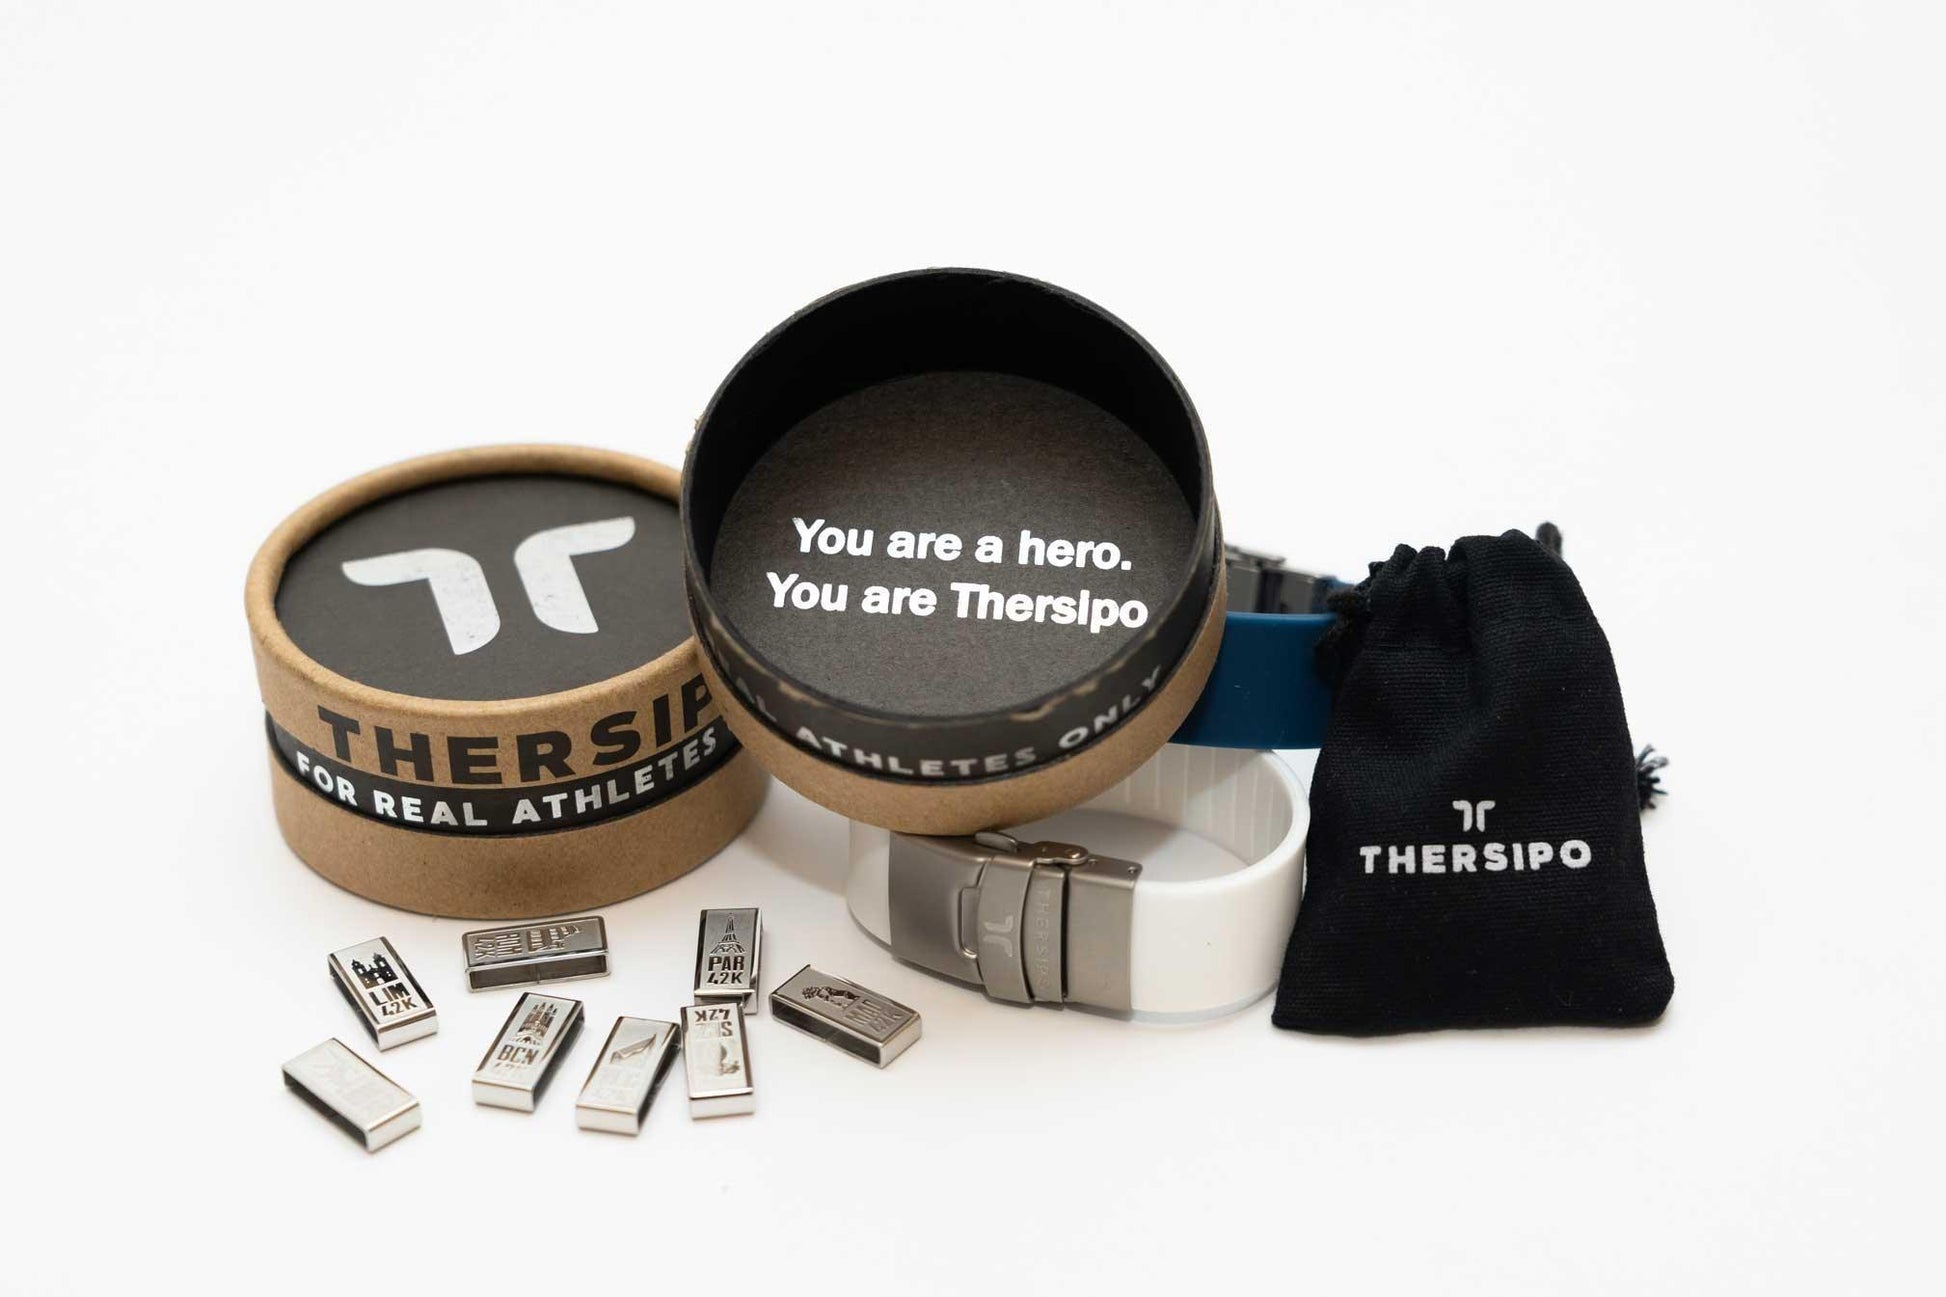 Portland Edition - Thersipo - Medals - 26.2, 26.2mi, 42, 42k, MARATHON, PDX, PORTLAND, PORTLAND MARATHON, Runners, Running, spo-default, spo-disabled, spo-notify-me-disabled, US, USA, Western US - The perfect gift for marathon runners